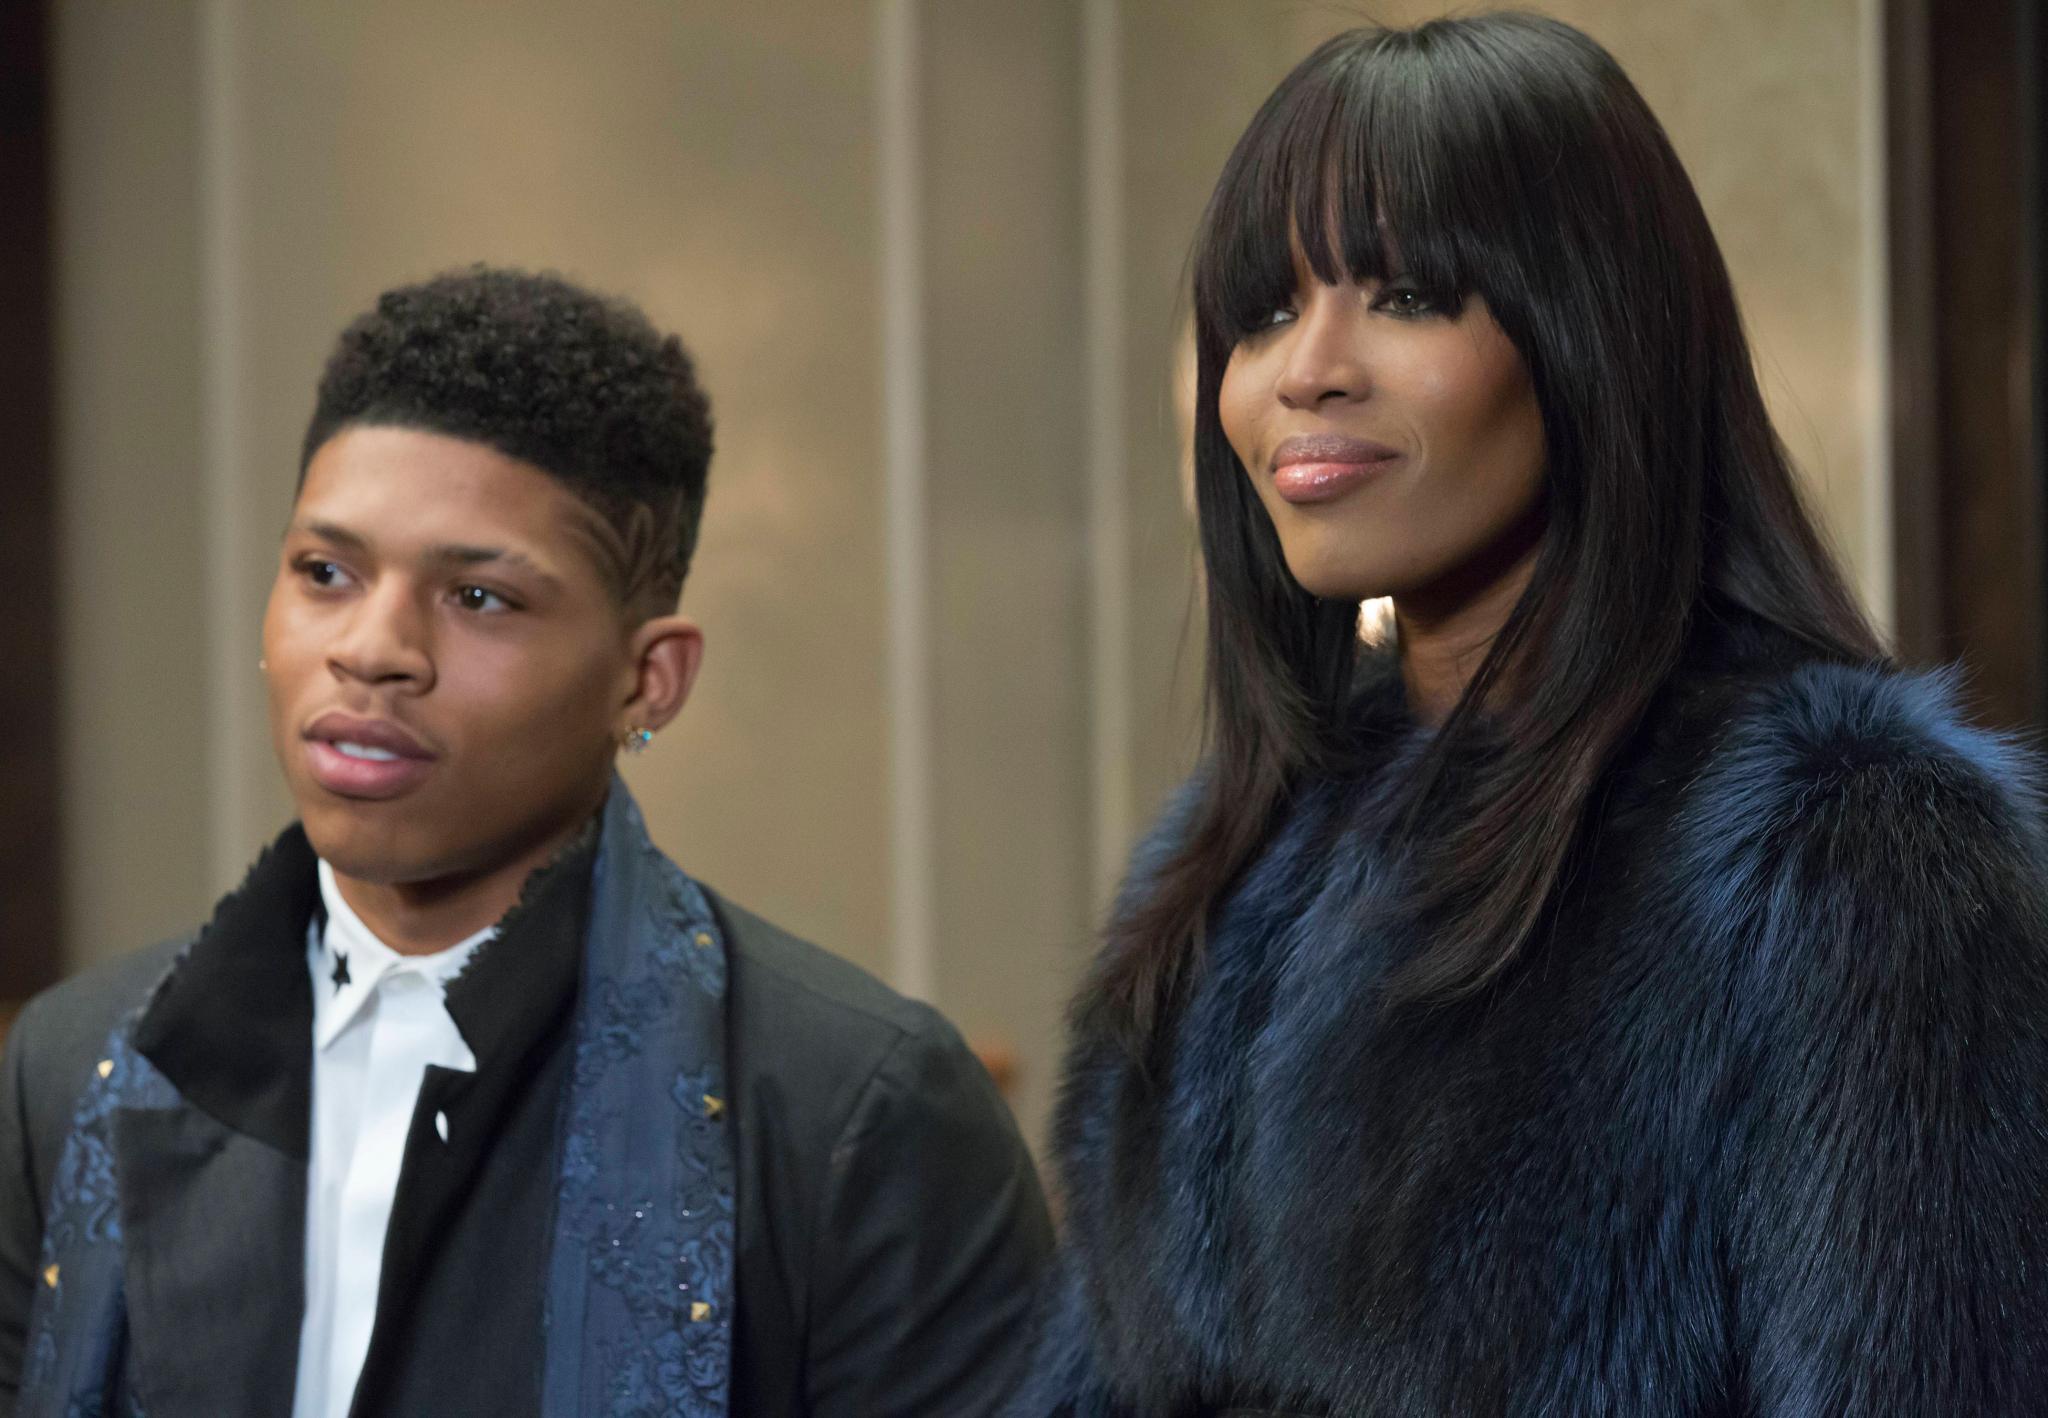 Get Your "Empire" Fix with a Sneak Peek of This Week's Episode
